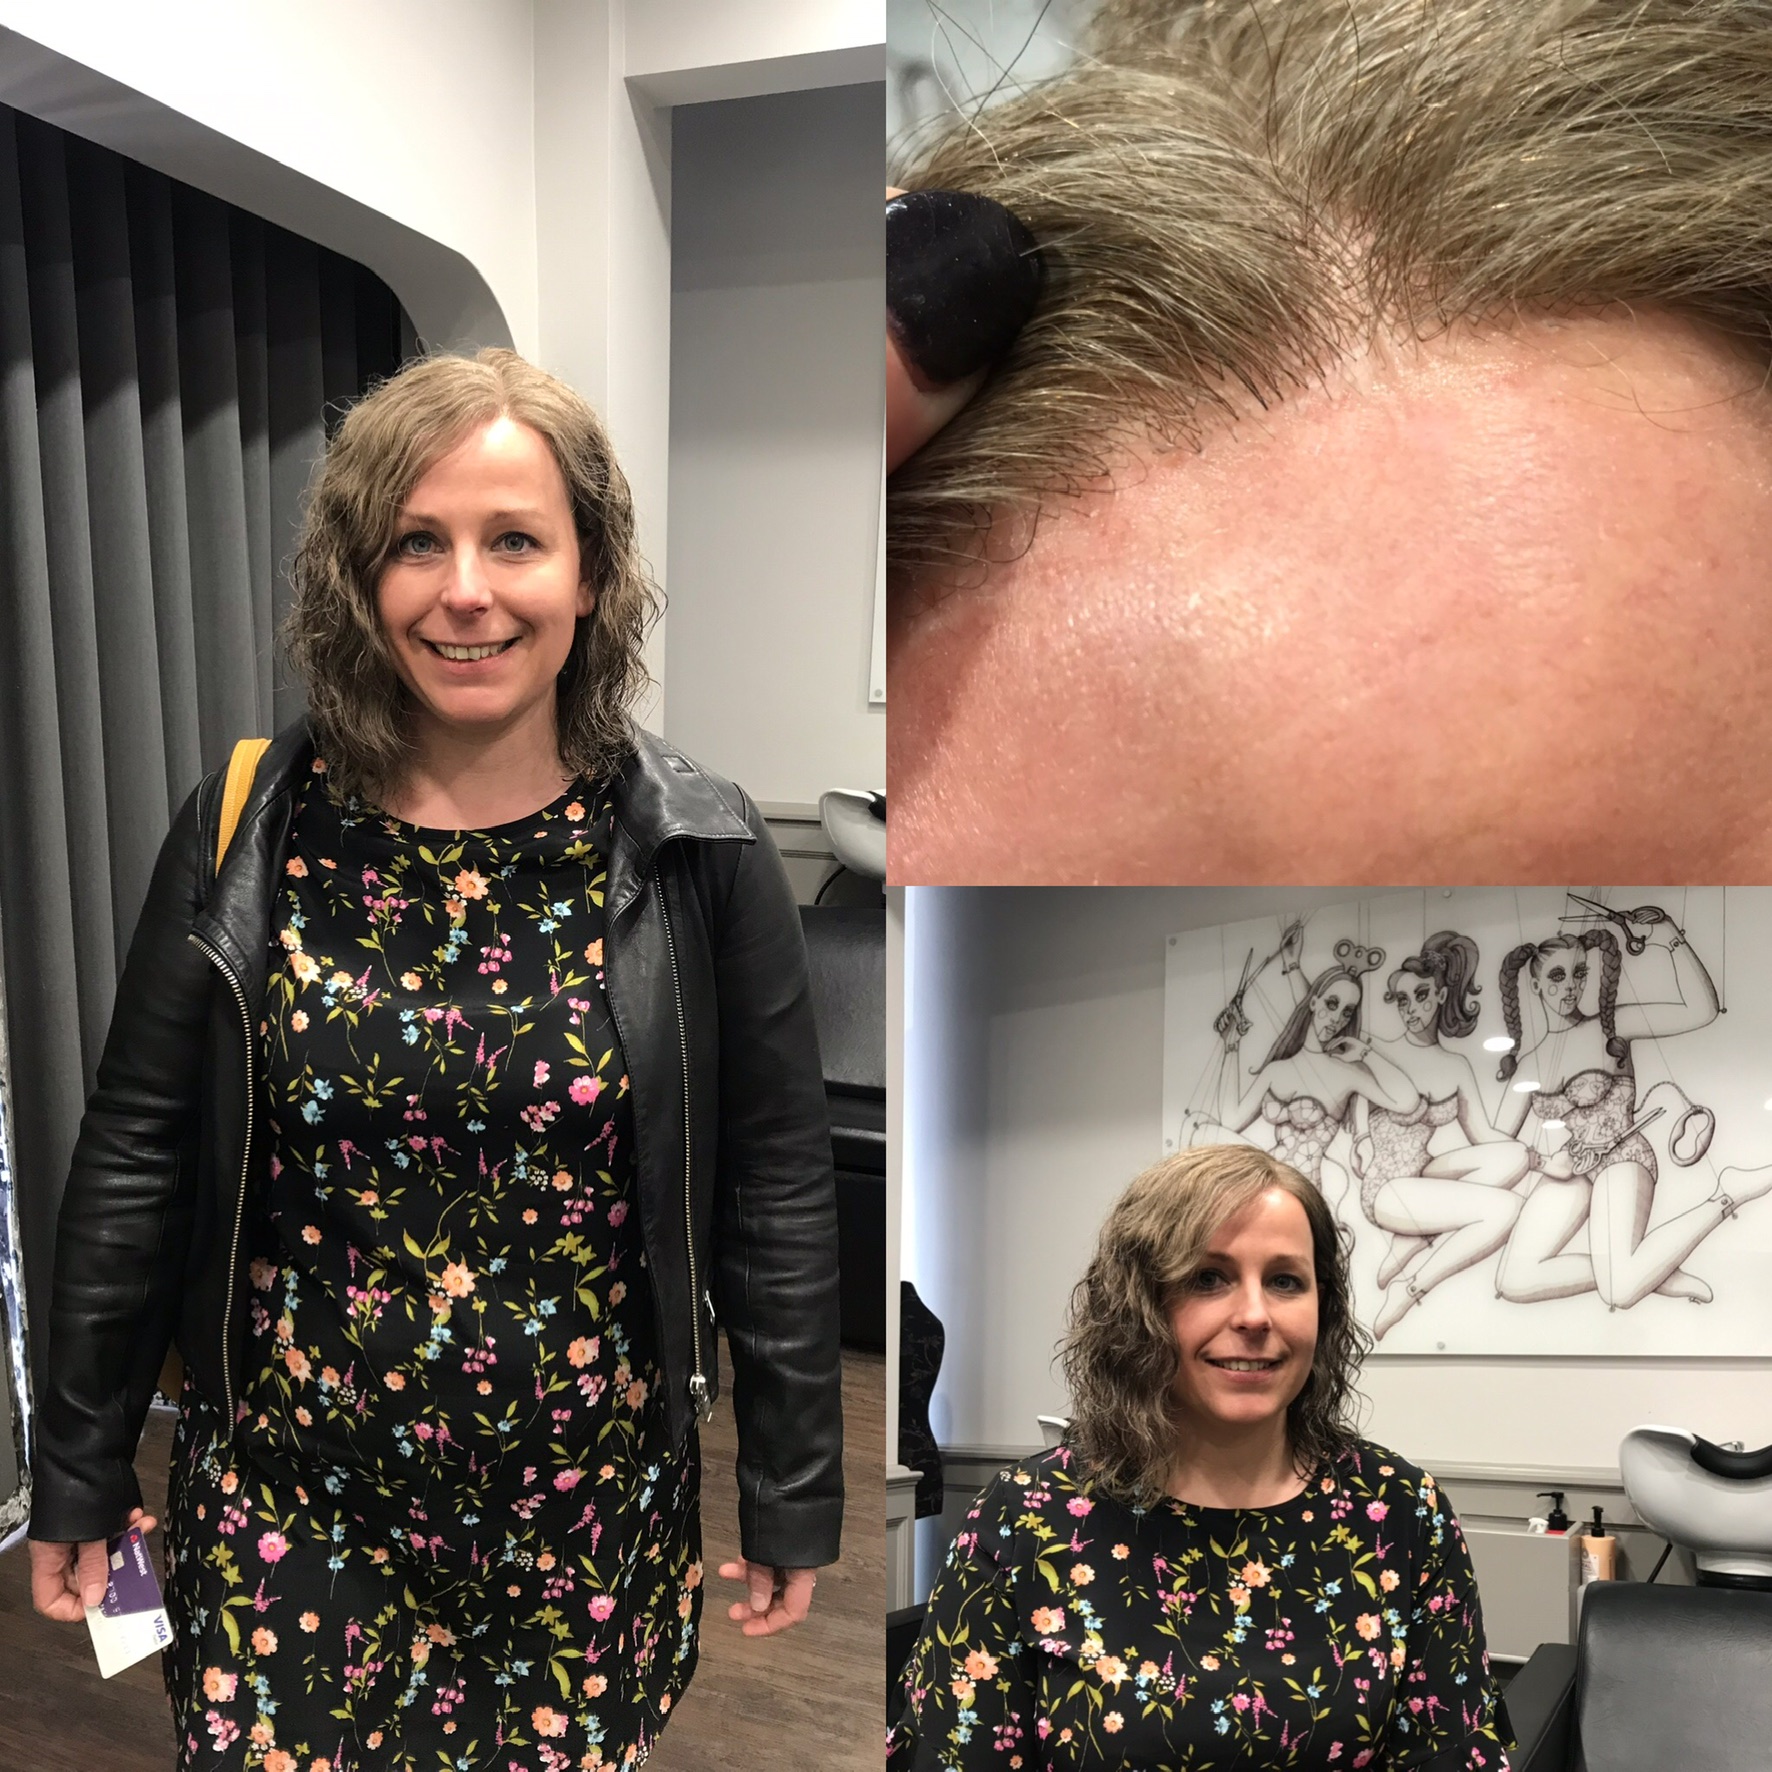 Hair replacement with brunette short hair on woman